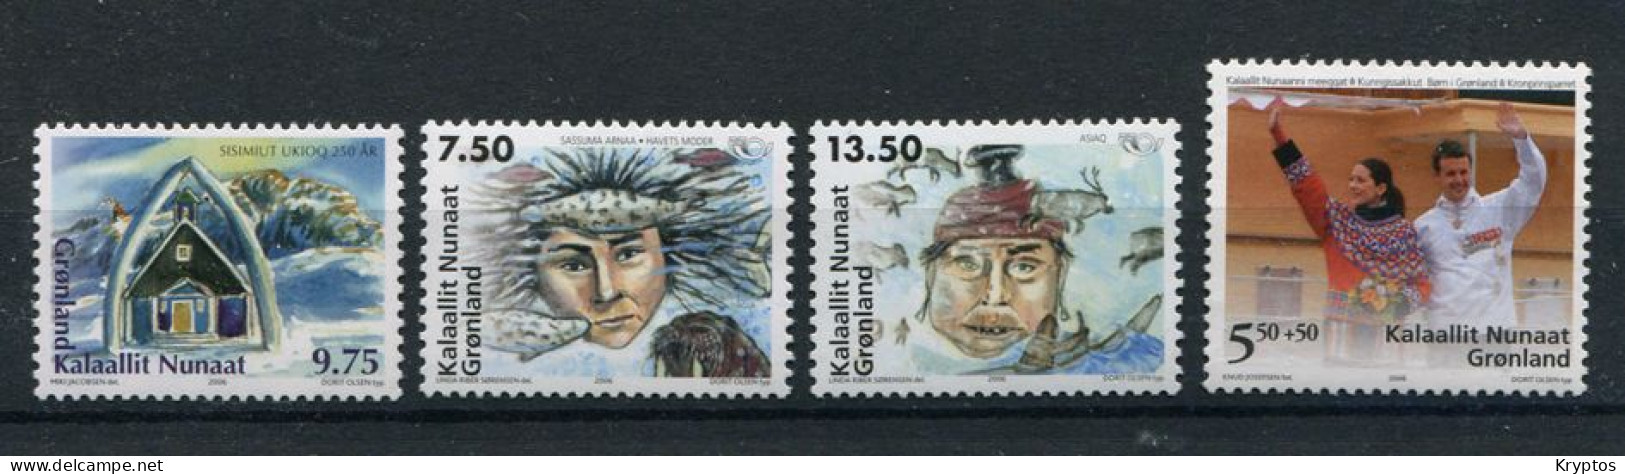 Greenland 2006. 4 Stamps. All MINT - Unused Stamps